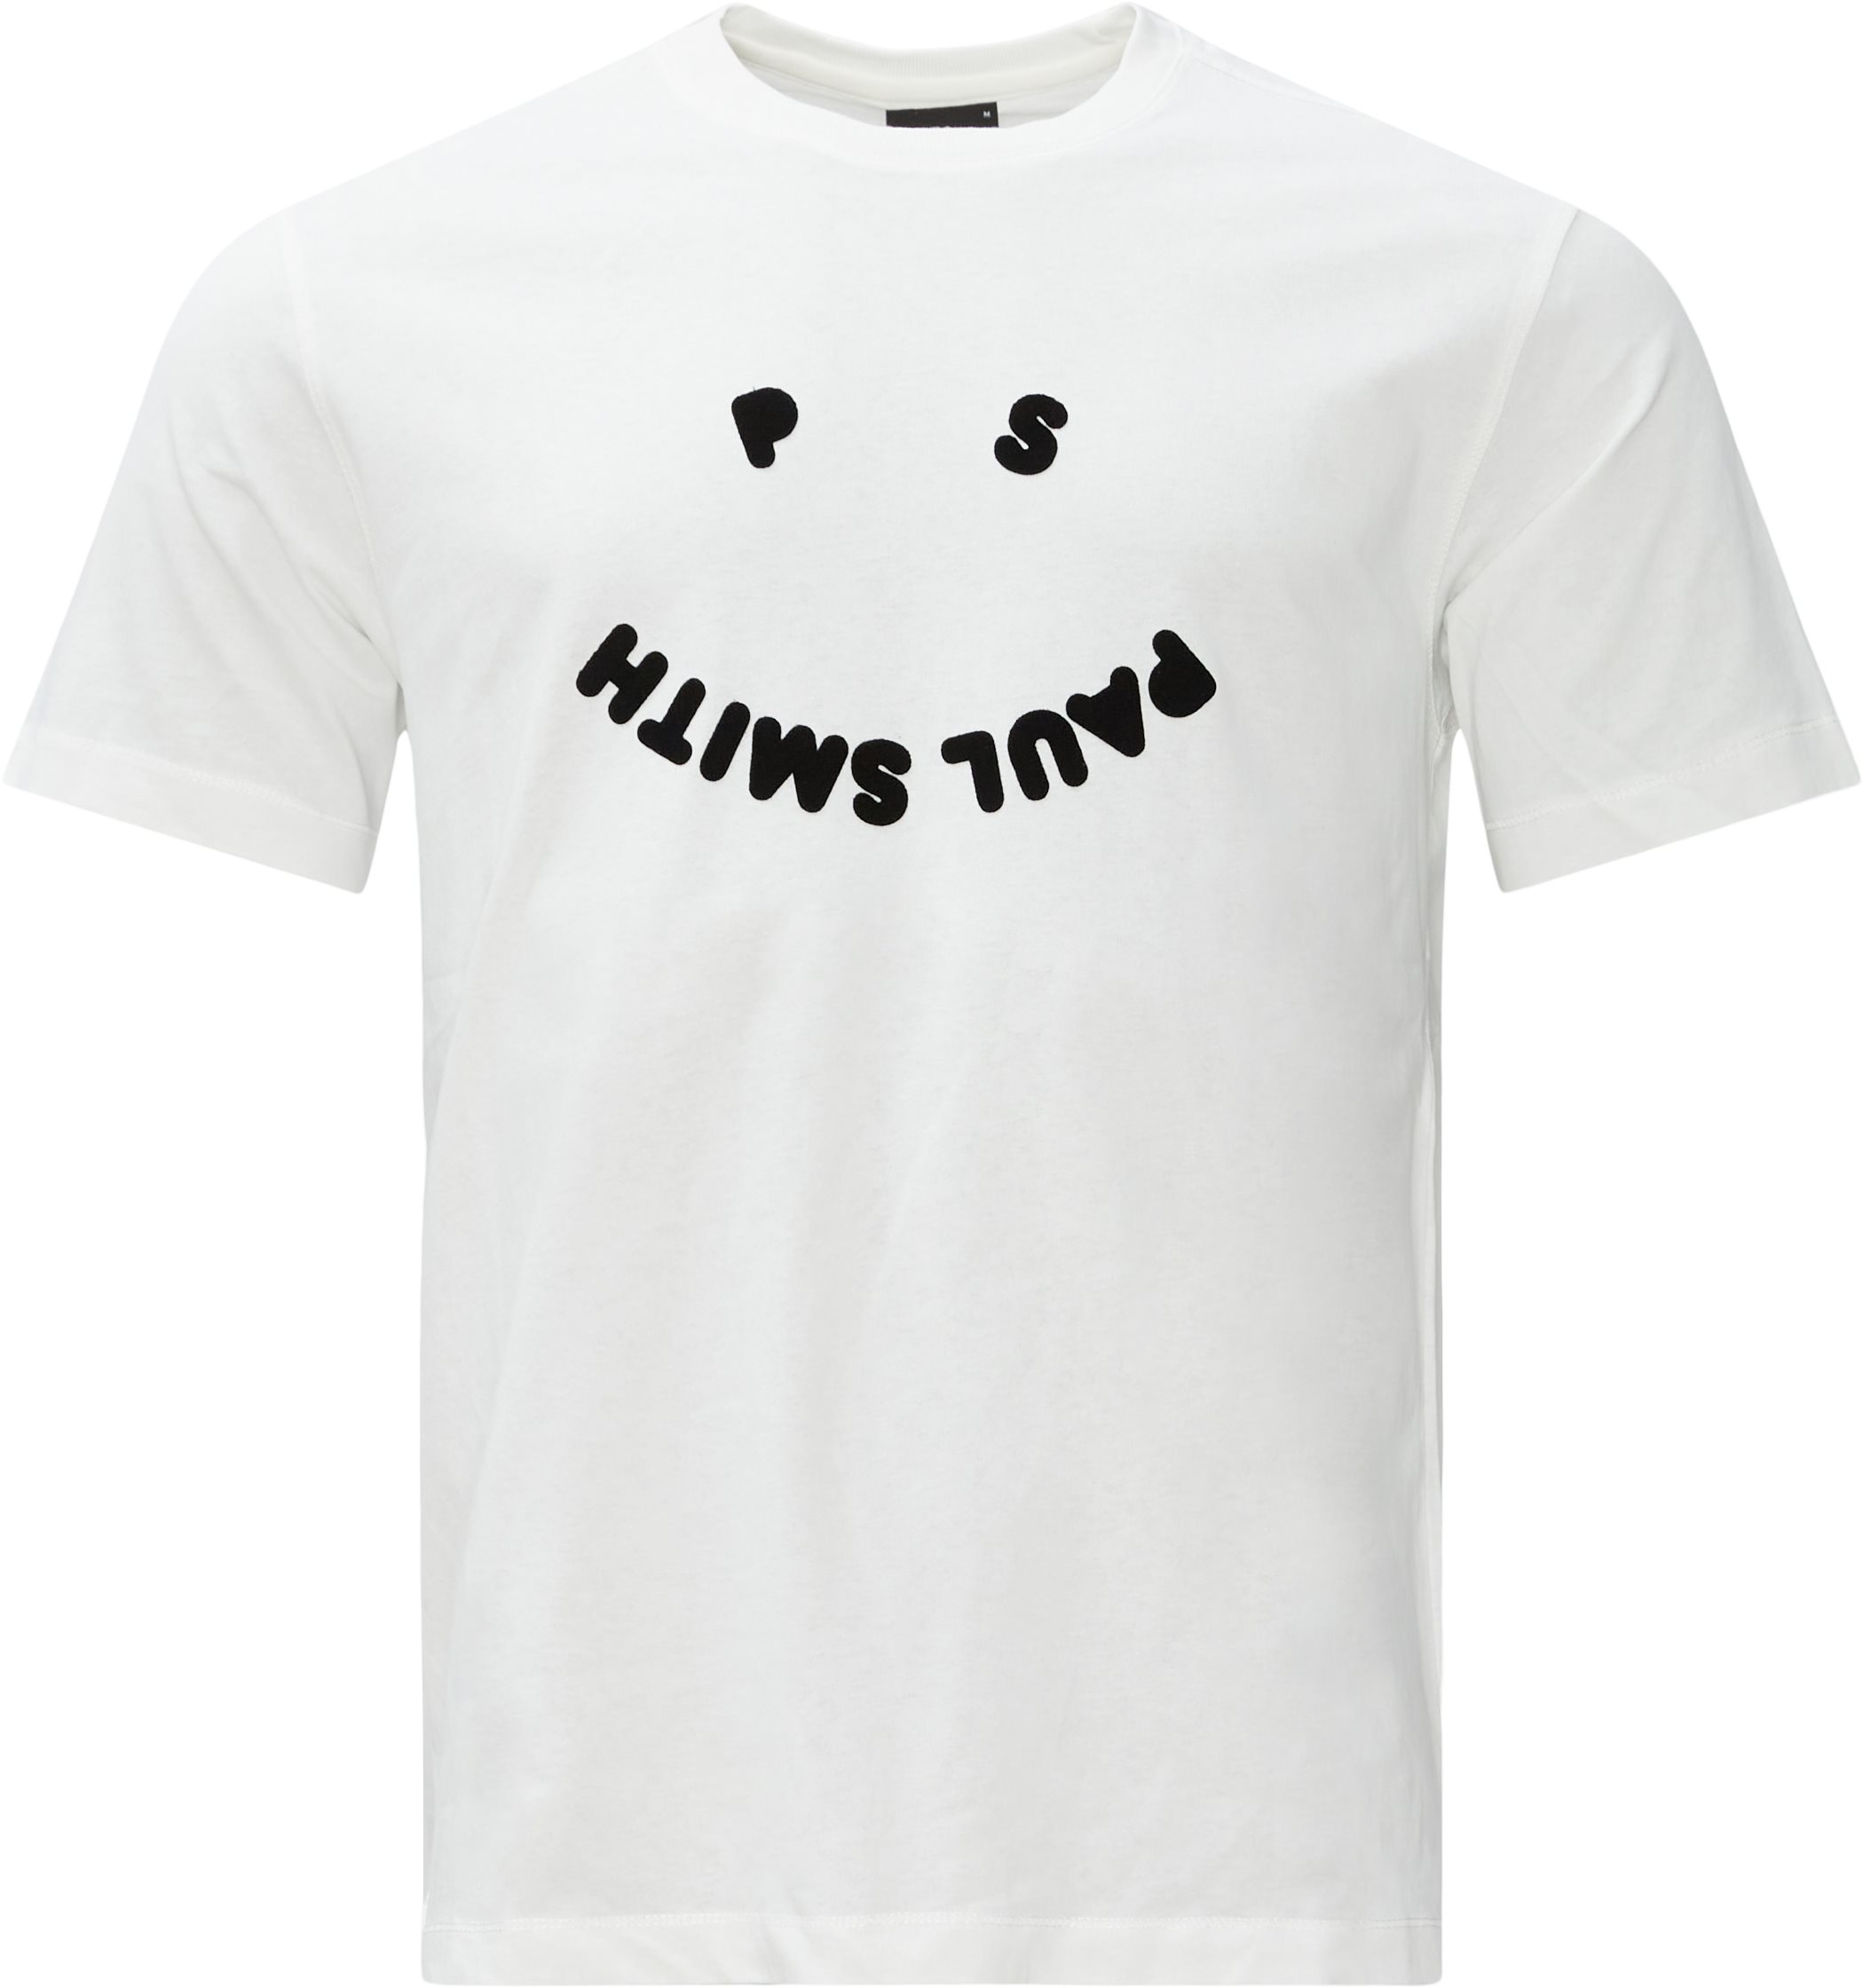 Smiley Tee - T-shirts - Regular fit - White